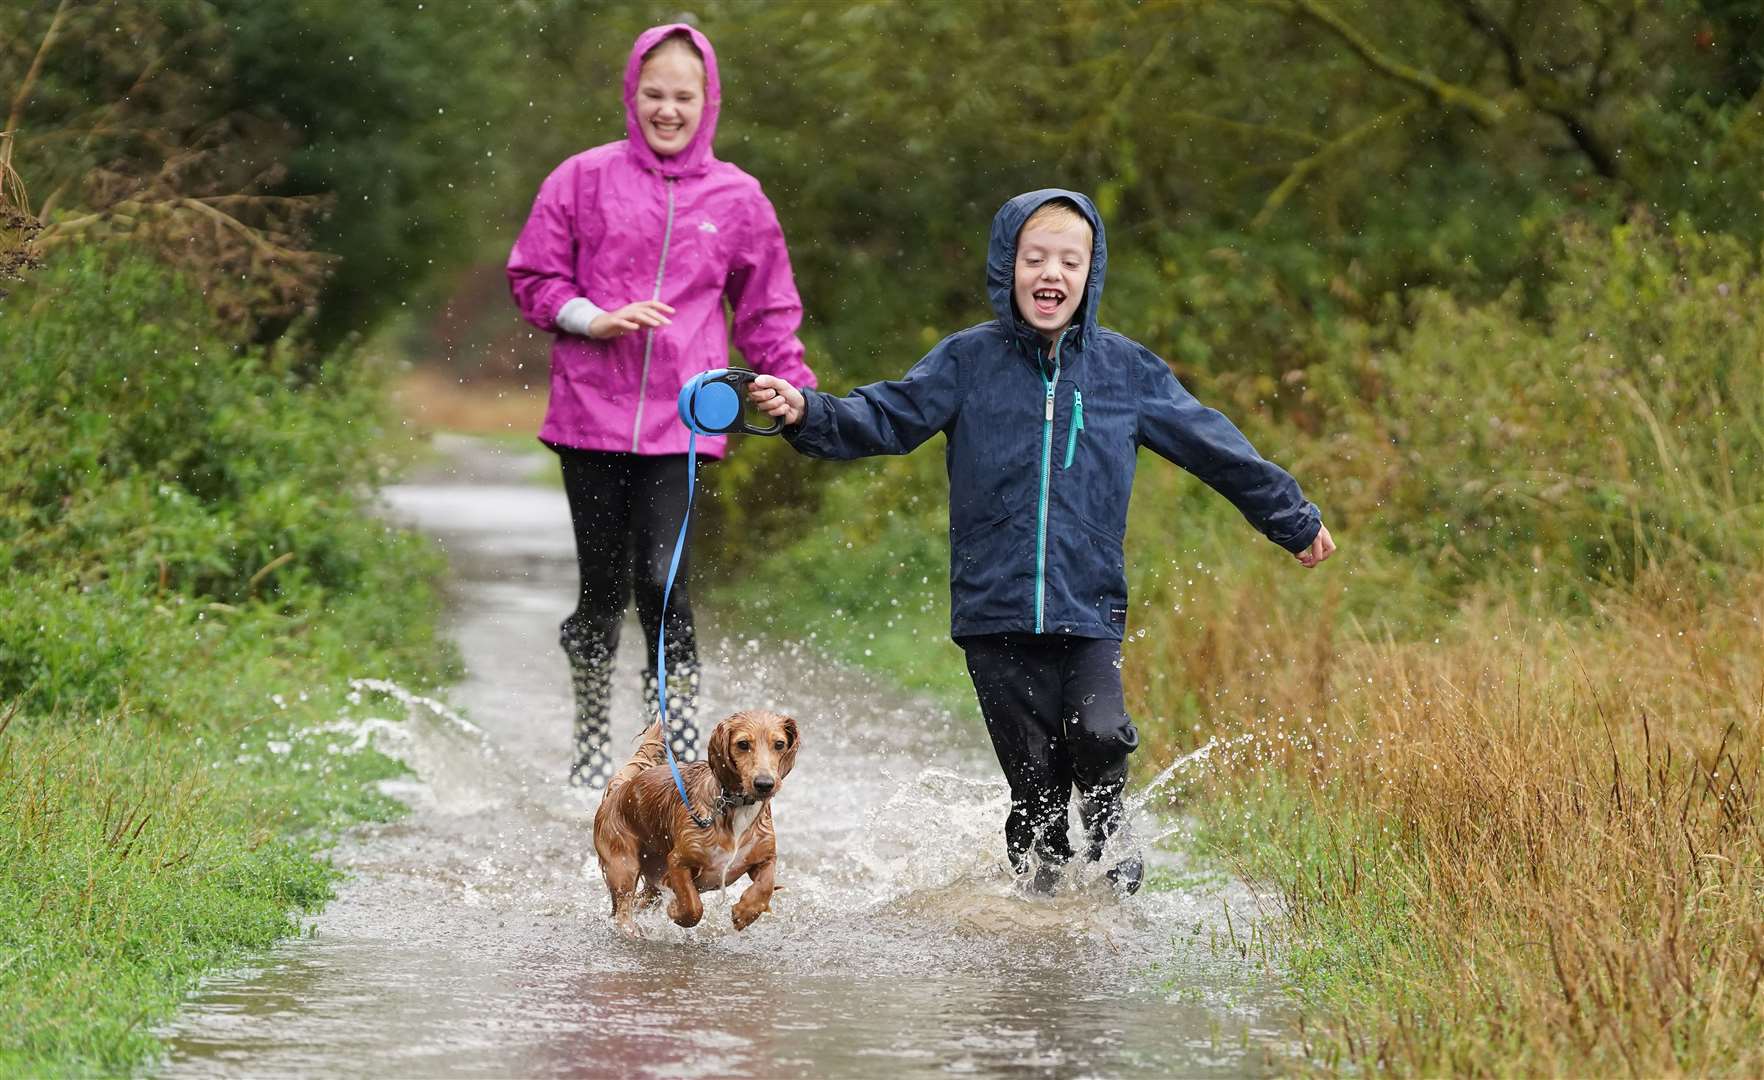 His owners Mia West, 11, and Jack West, 7, shared in the splashy fun in appropriately named Rainham in Kent (Ian West/PA)